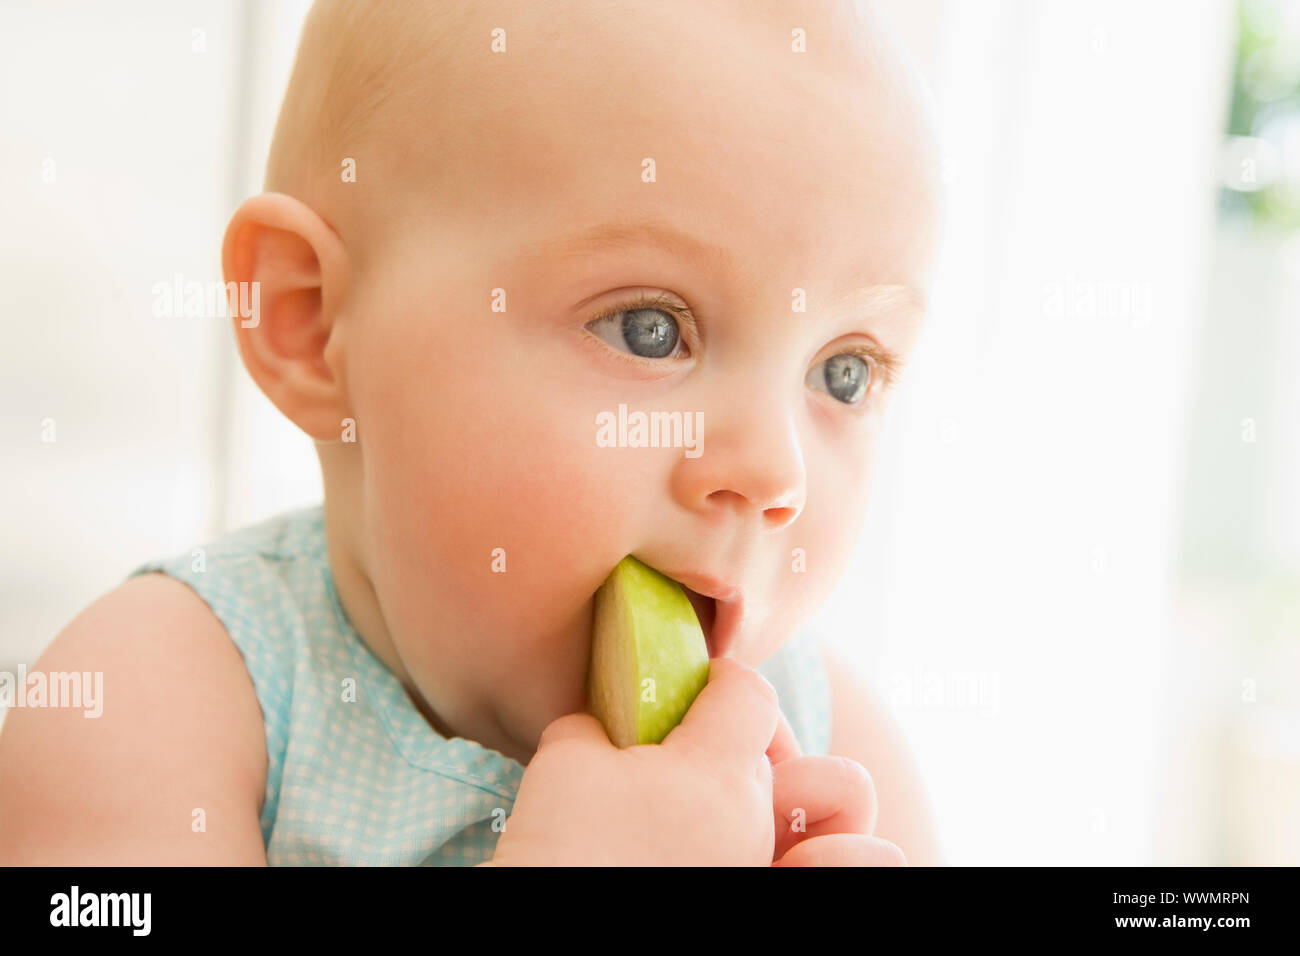 Baby eating apple indoors Stock Photo